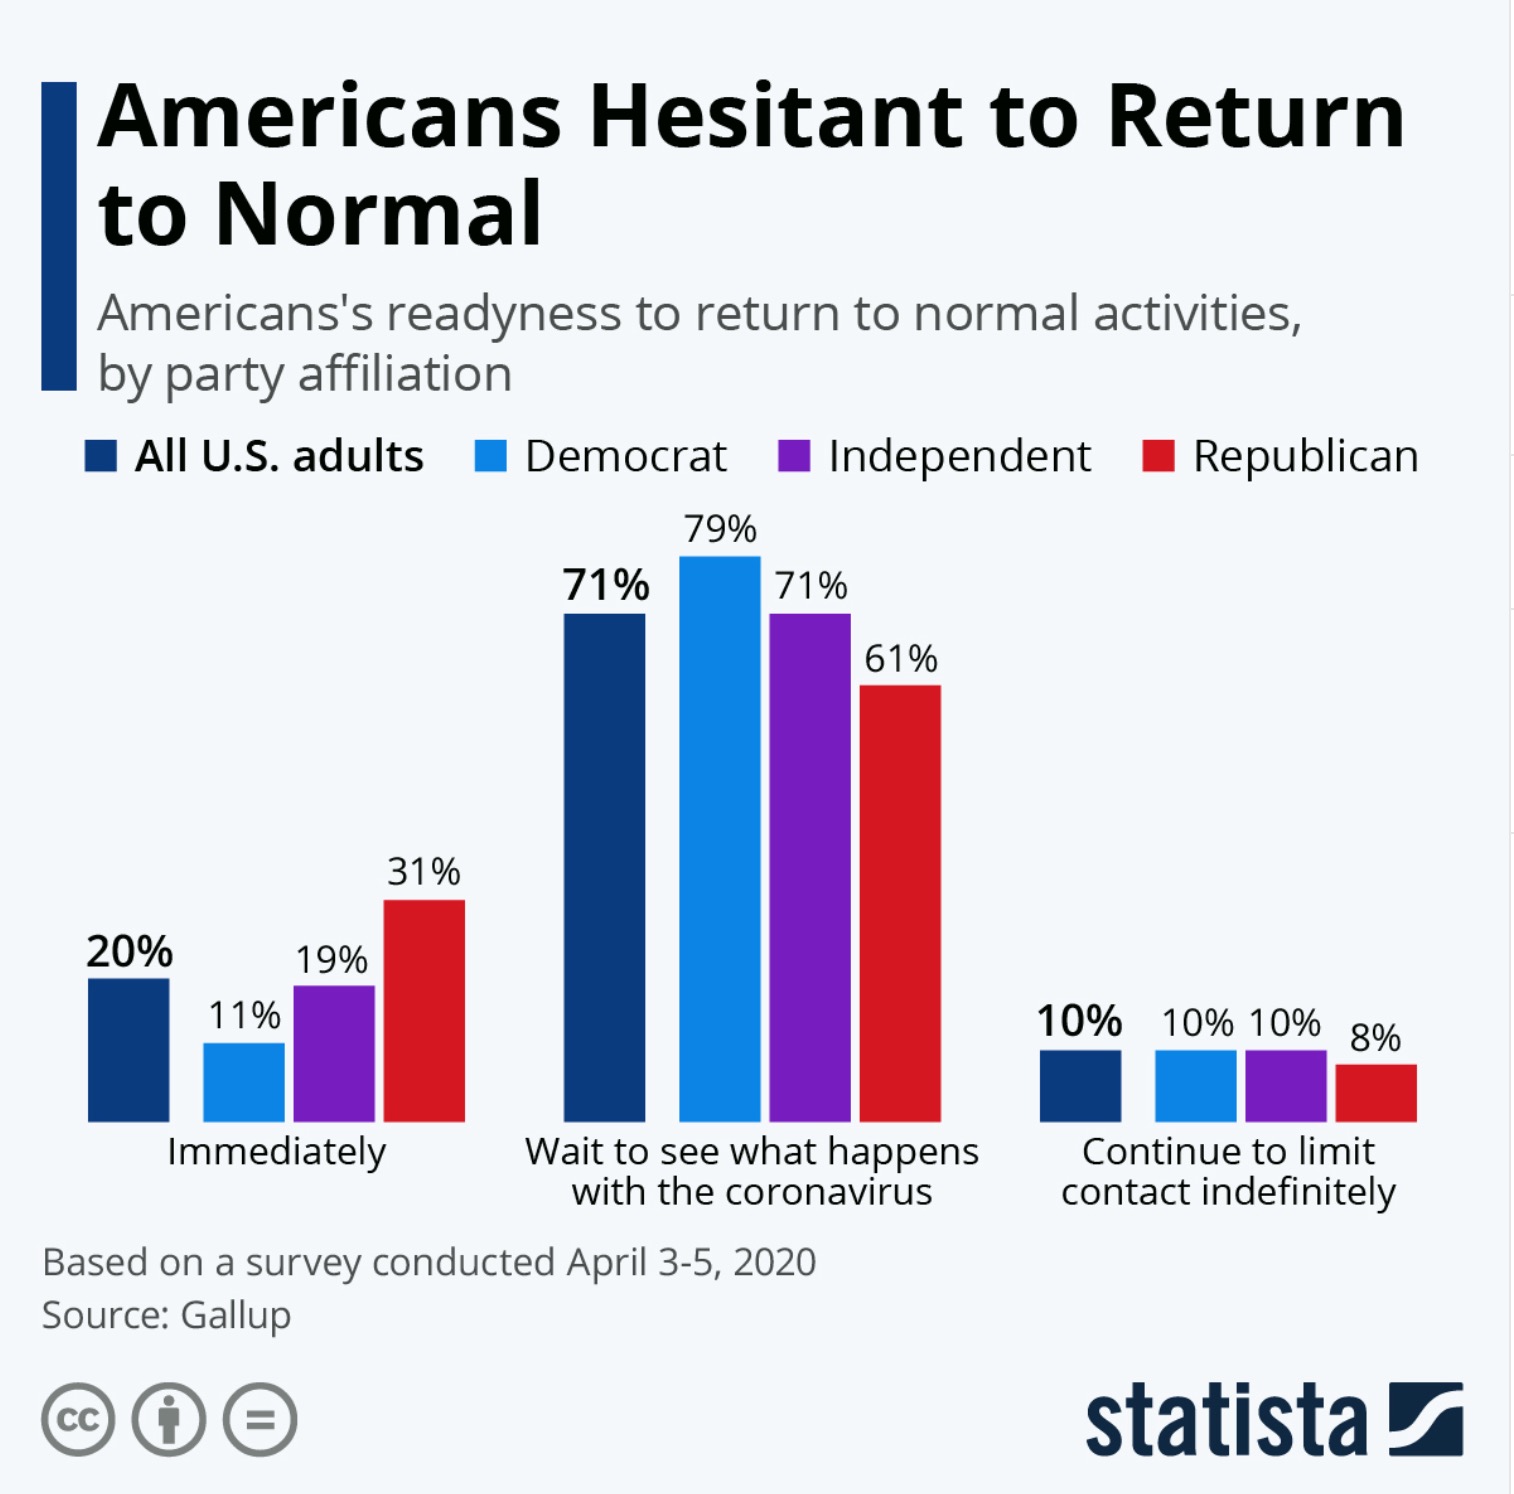 Poll: Are you Ready for Normal?